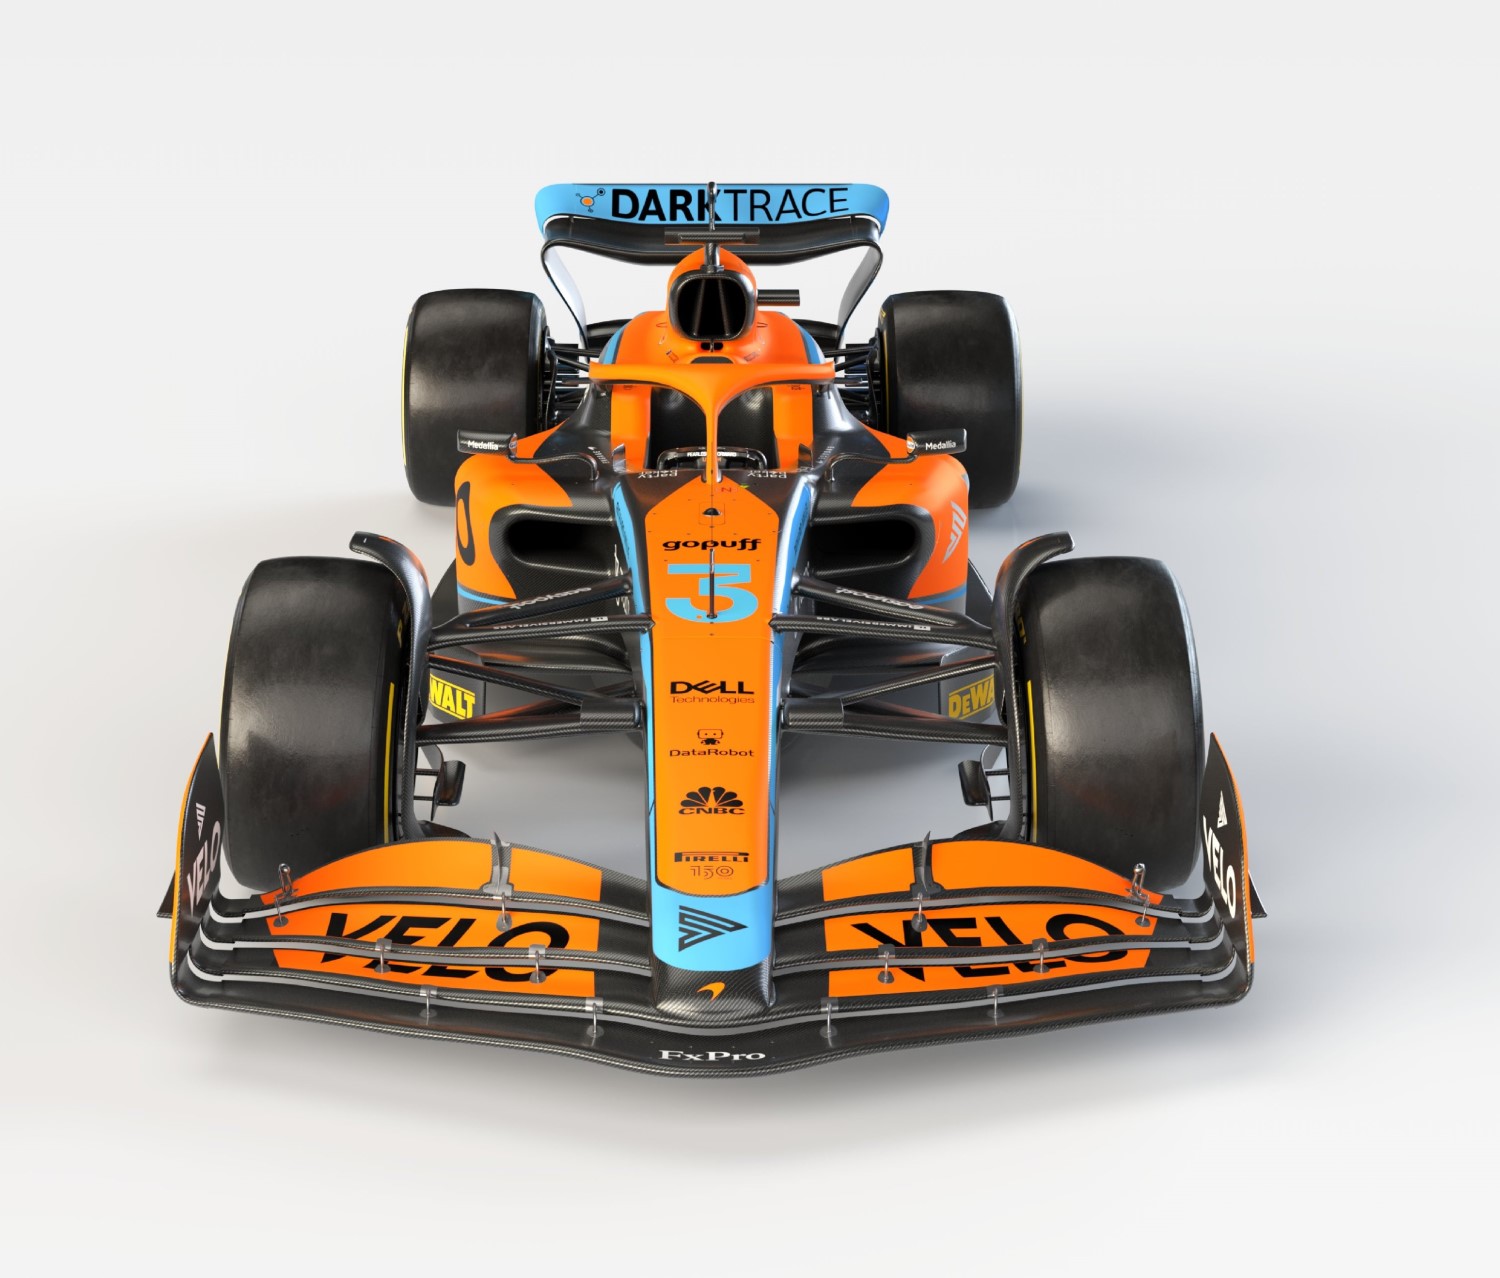 2022 Car, News and Videos